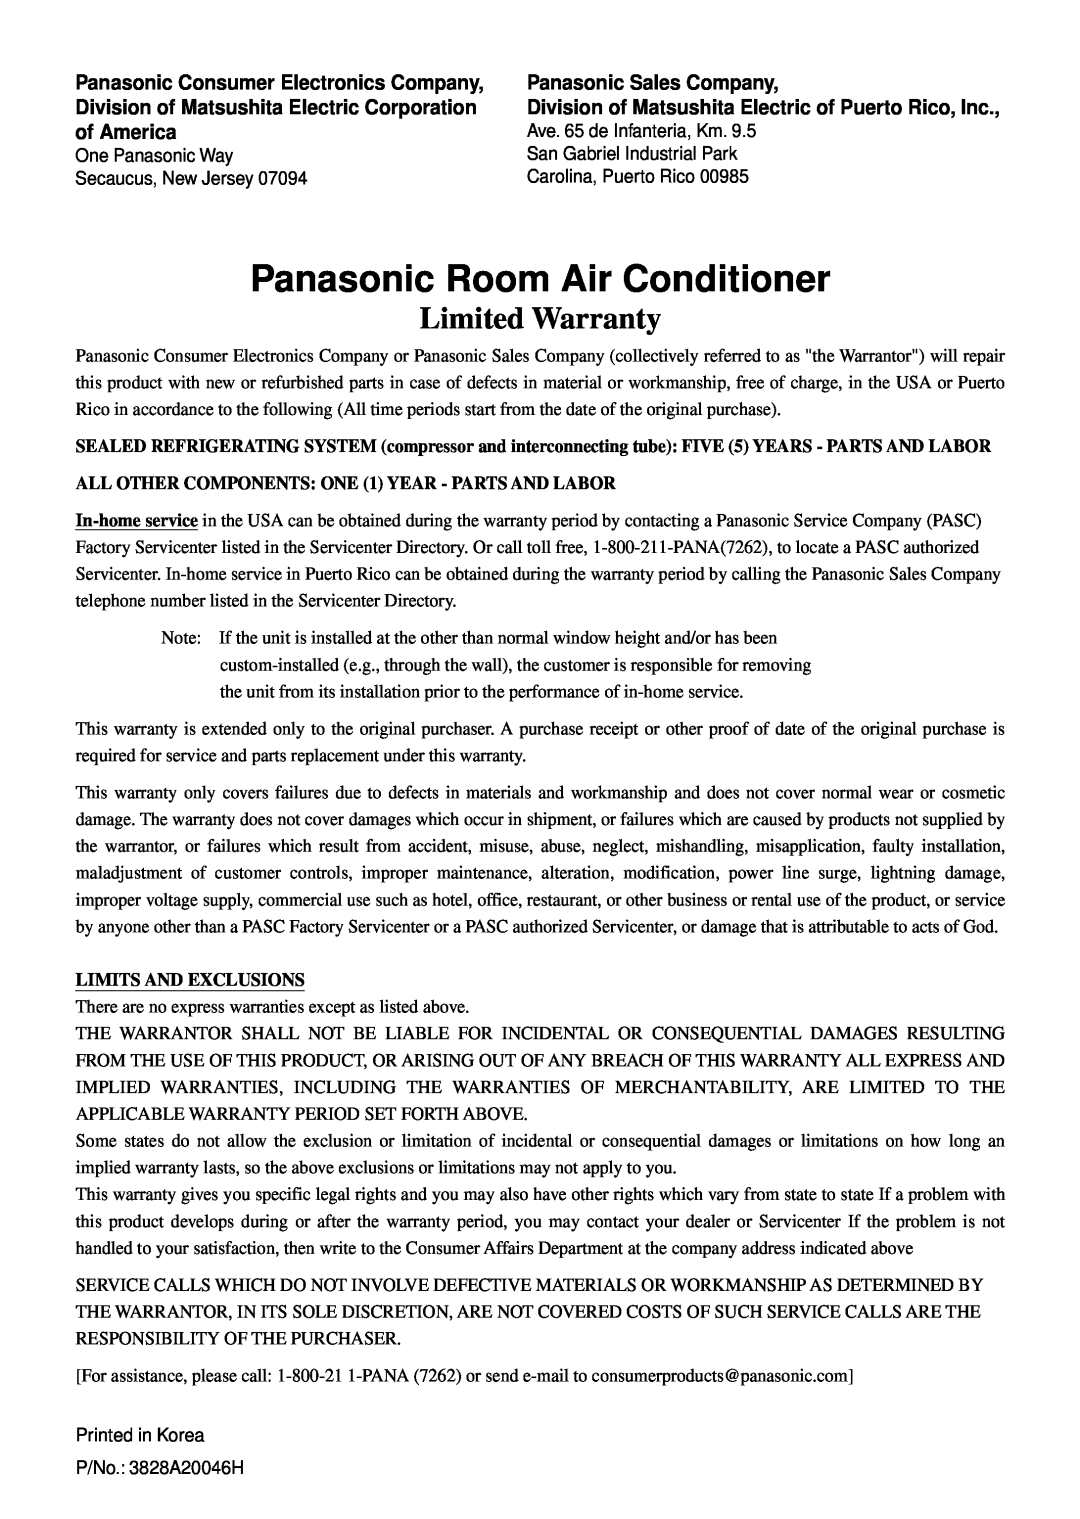 Panasonic HQ-2243TH manual Panasonic Room Air Conditioner, Limited Warranty, Limits And Exclusions 